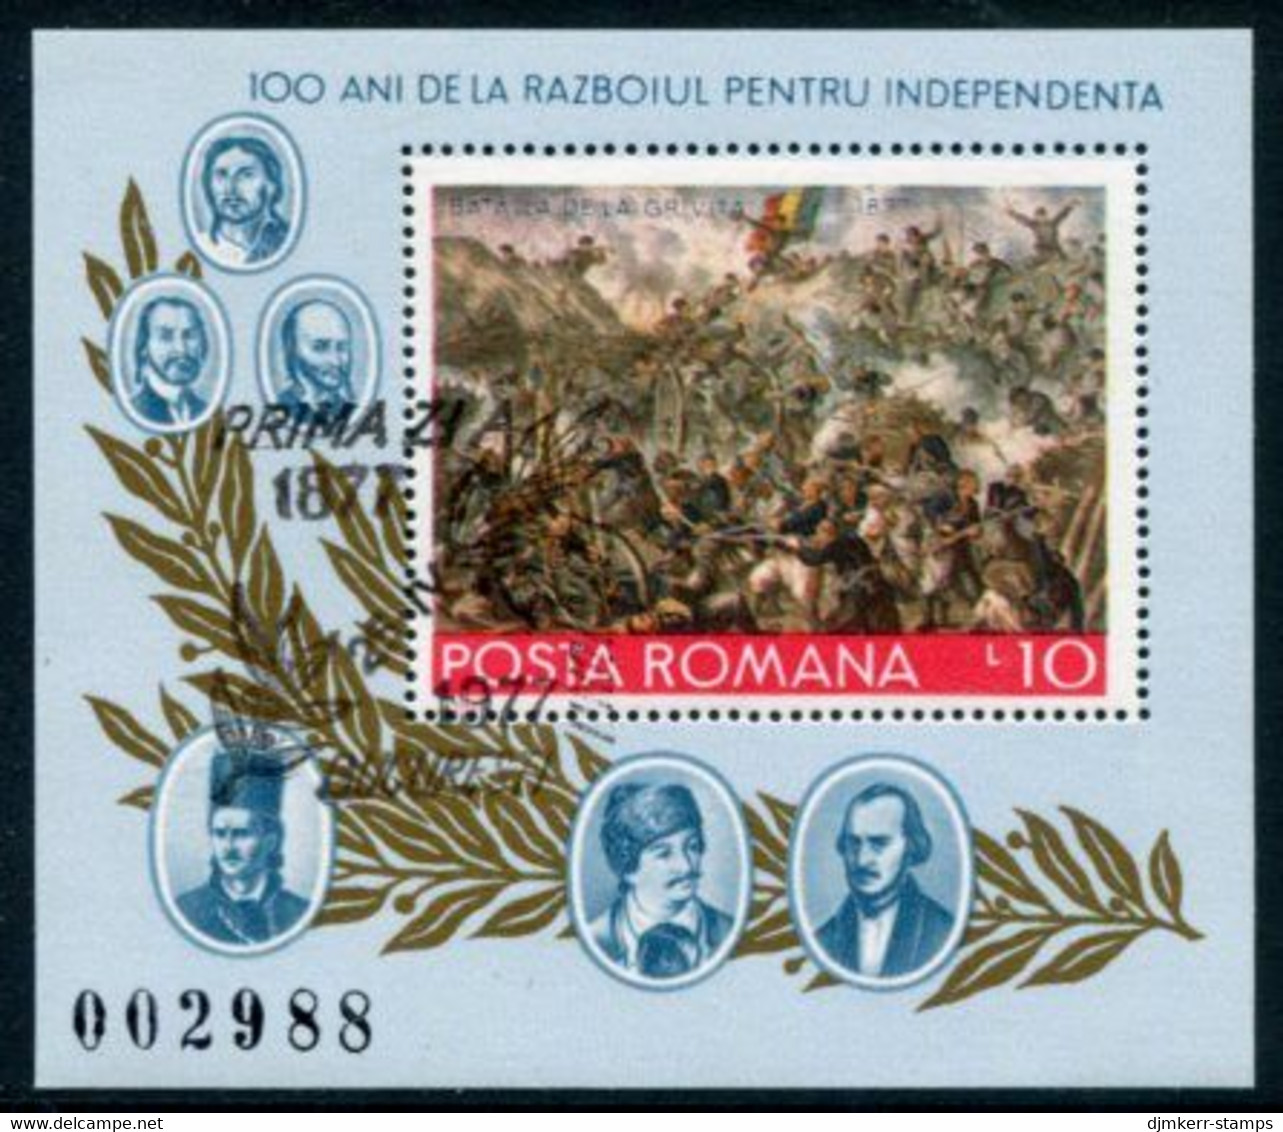 ROMANIA 1977 Centenary Of Independence Block Used.  Michel Block 139 - Blocs-feuillets